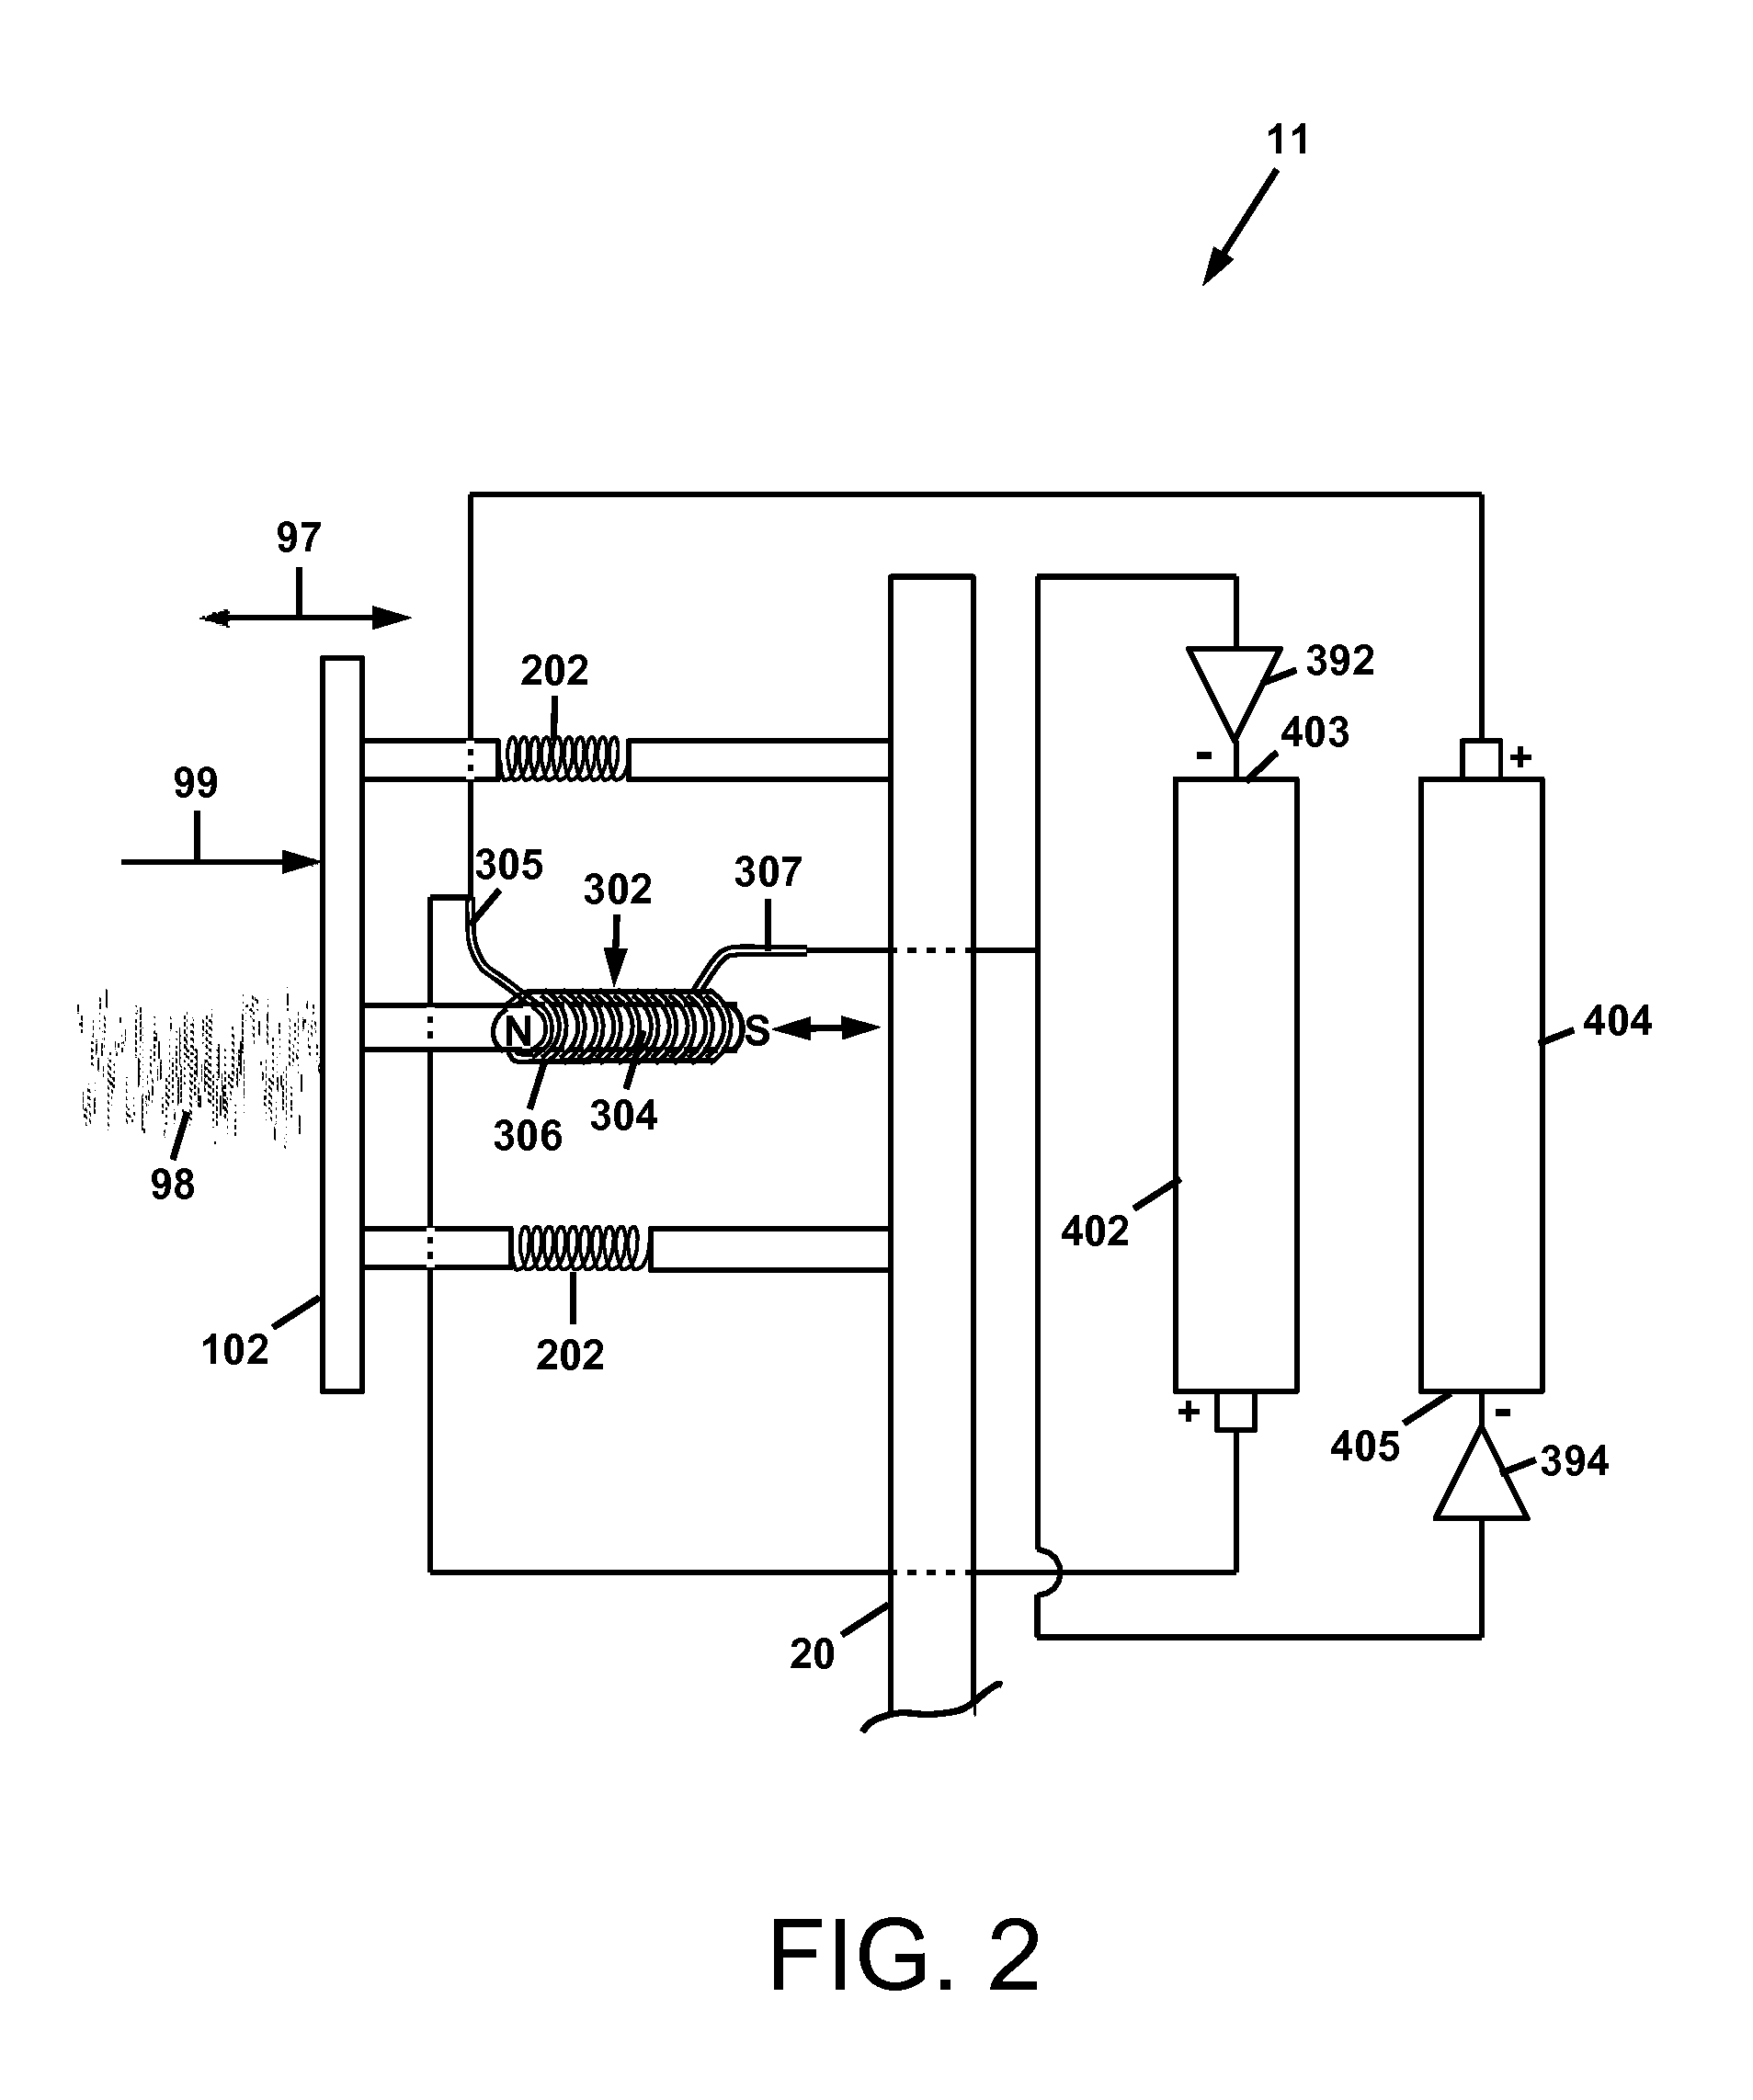 Apparatus and methods for recovery of variational wind energy